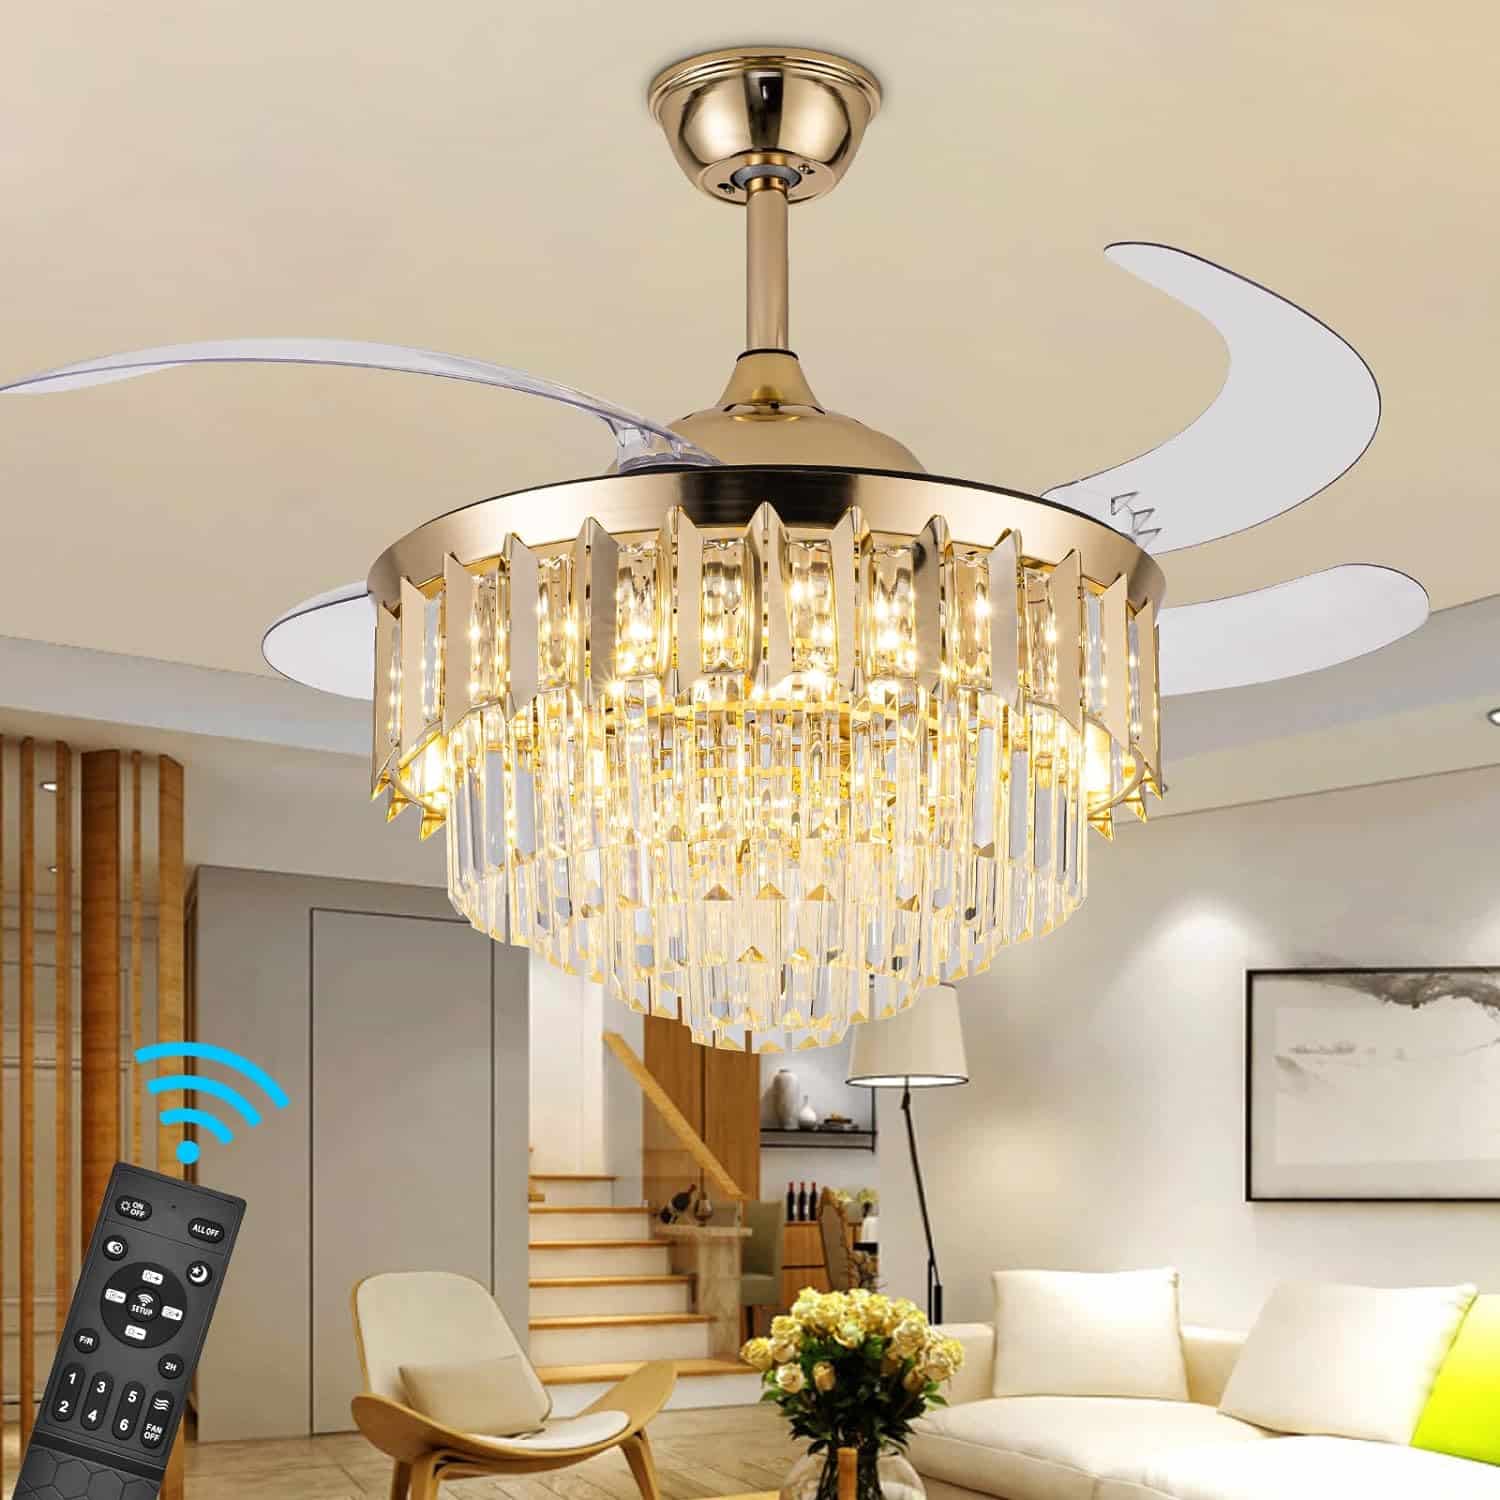 42 Inch Chandelier Ceiling Fan Modern Crystal Ceiling Fan with Lights Remote Control 6 Speed 3 Color Dimmable Silent Luxury Fandelier with Retractable Blades for Living Room Bedroom Decoration Gold